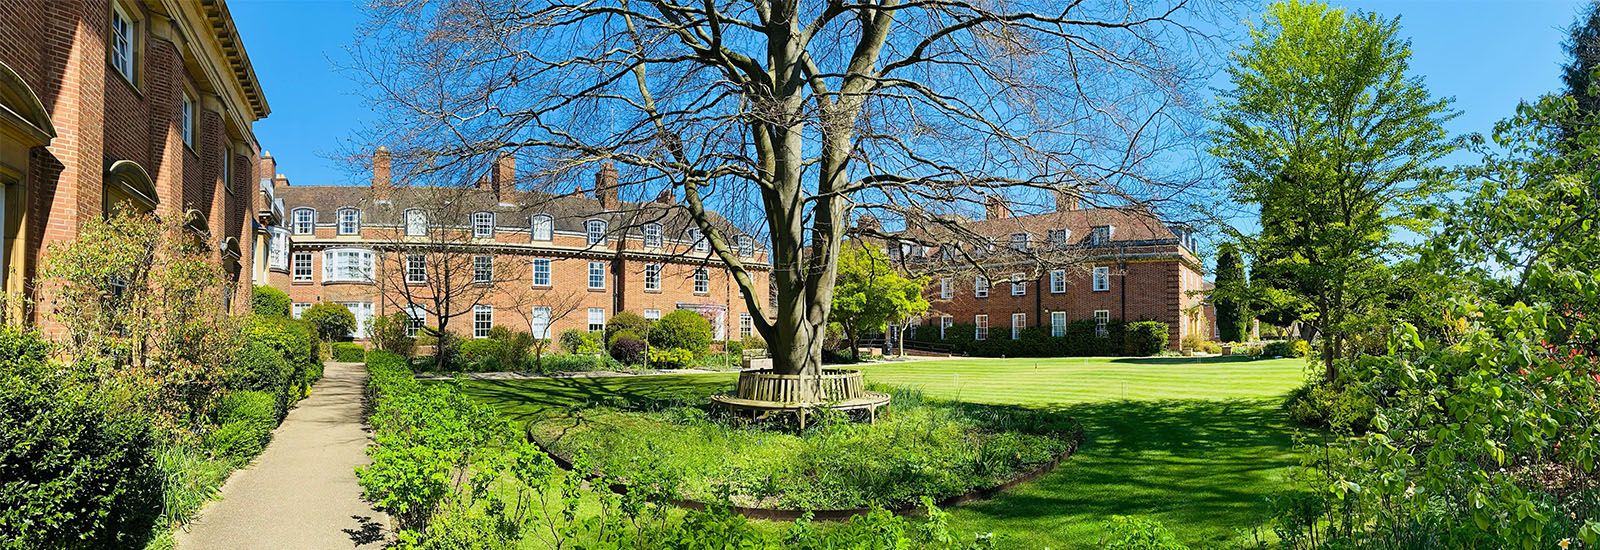 A photograph of St Hugh's college, with a large tree in the centre of the lawn.